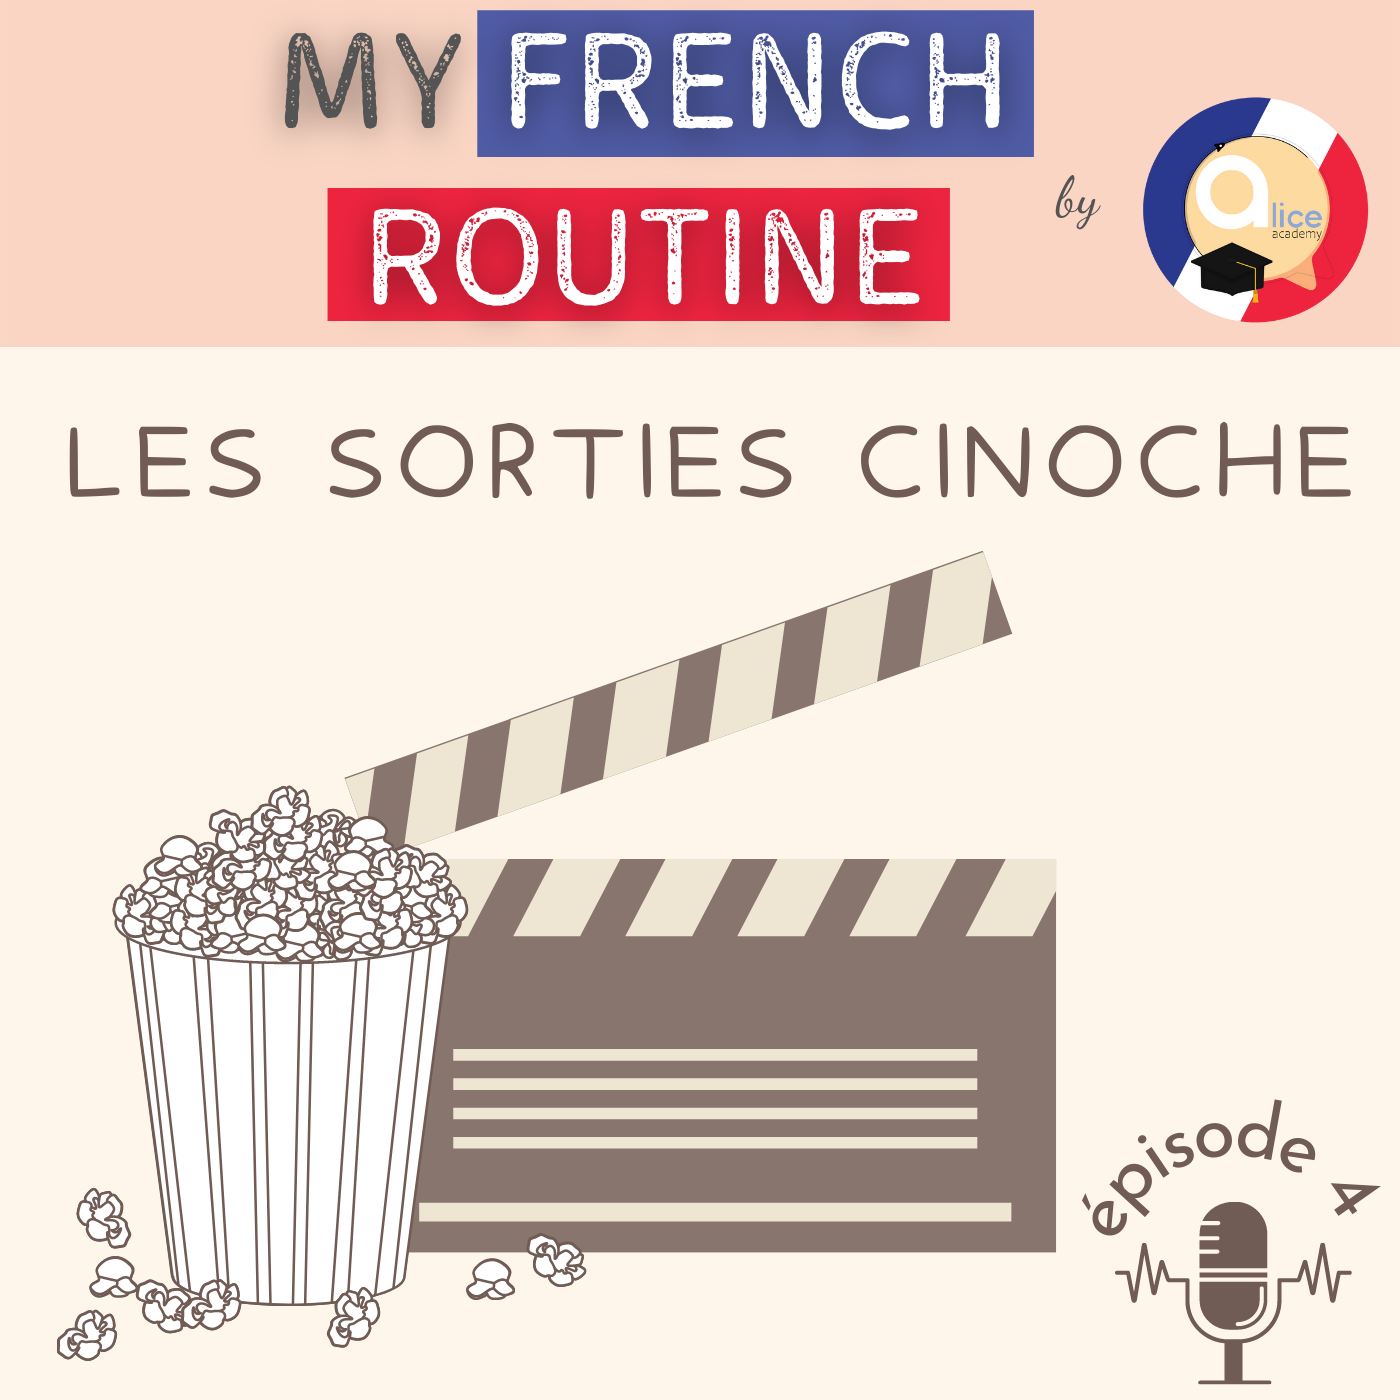 Les sorties cinoche - My French Routine